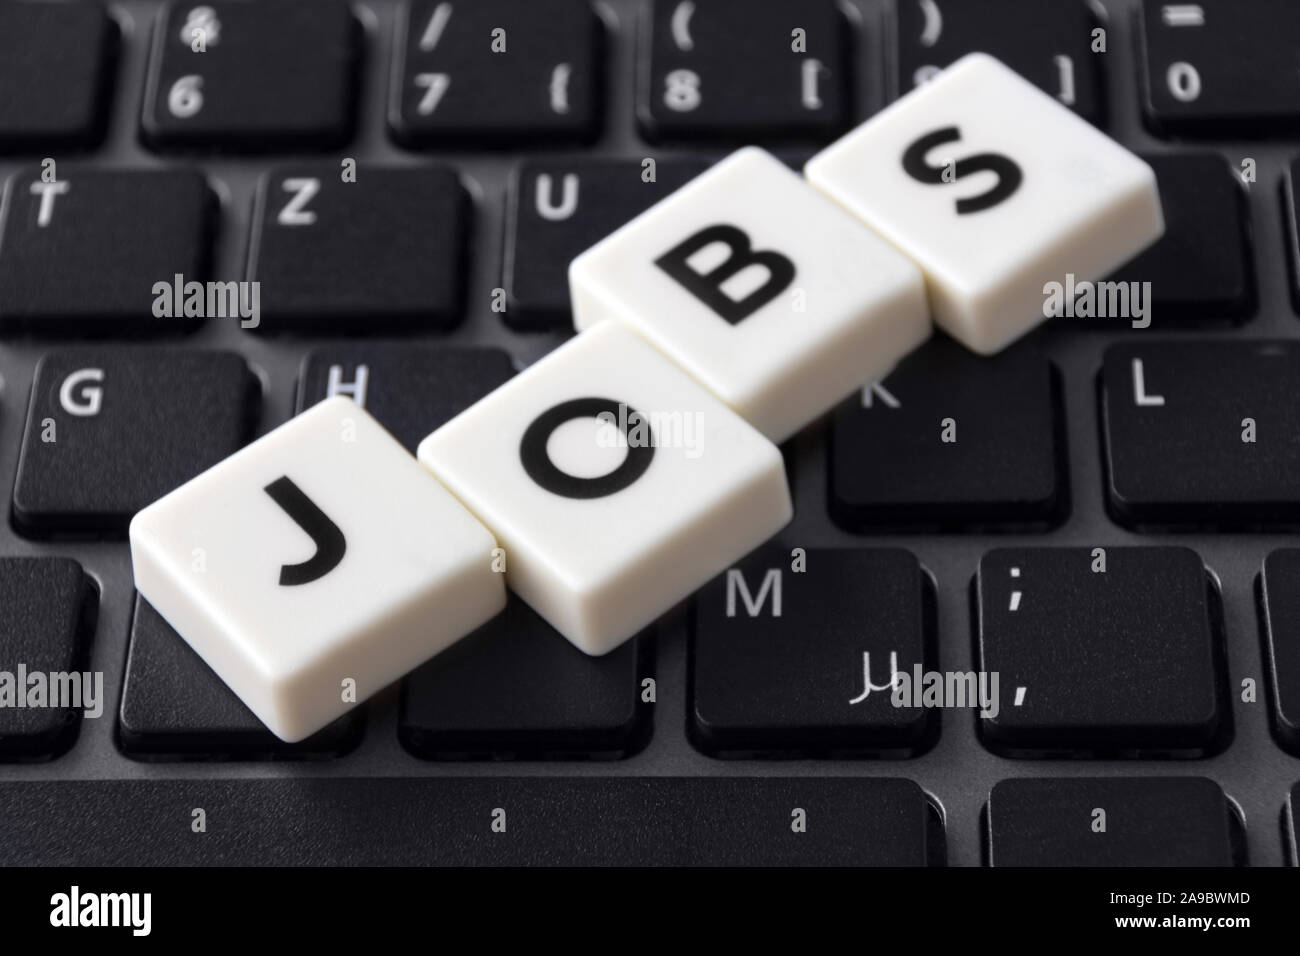 Jobs Symbol and keyboard background Stock Photo